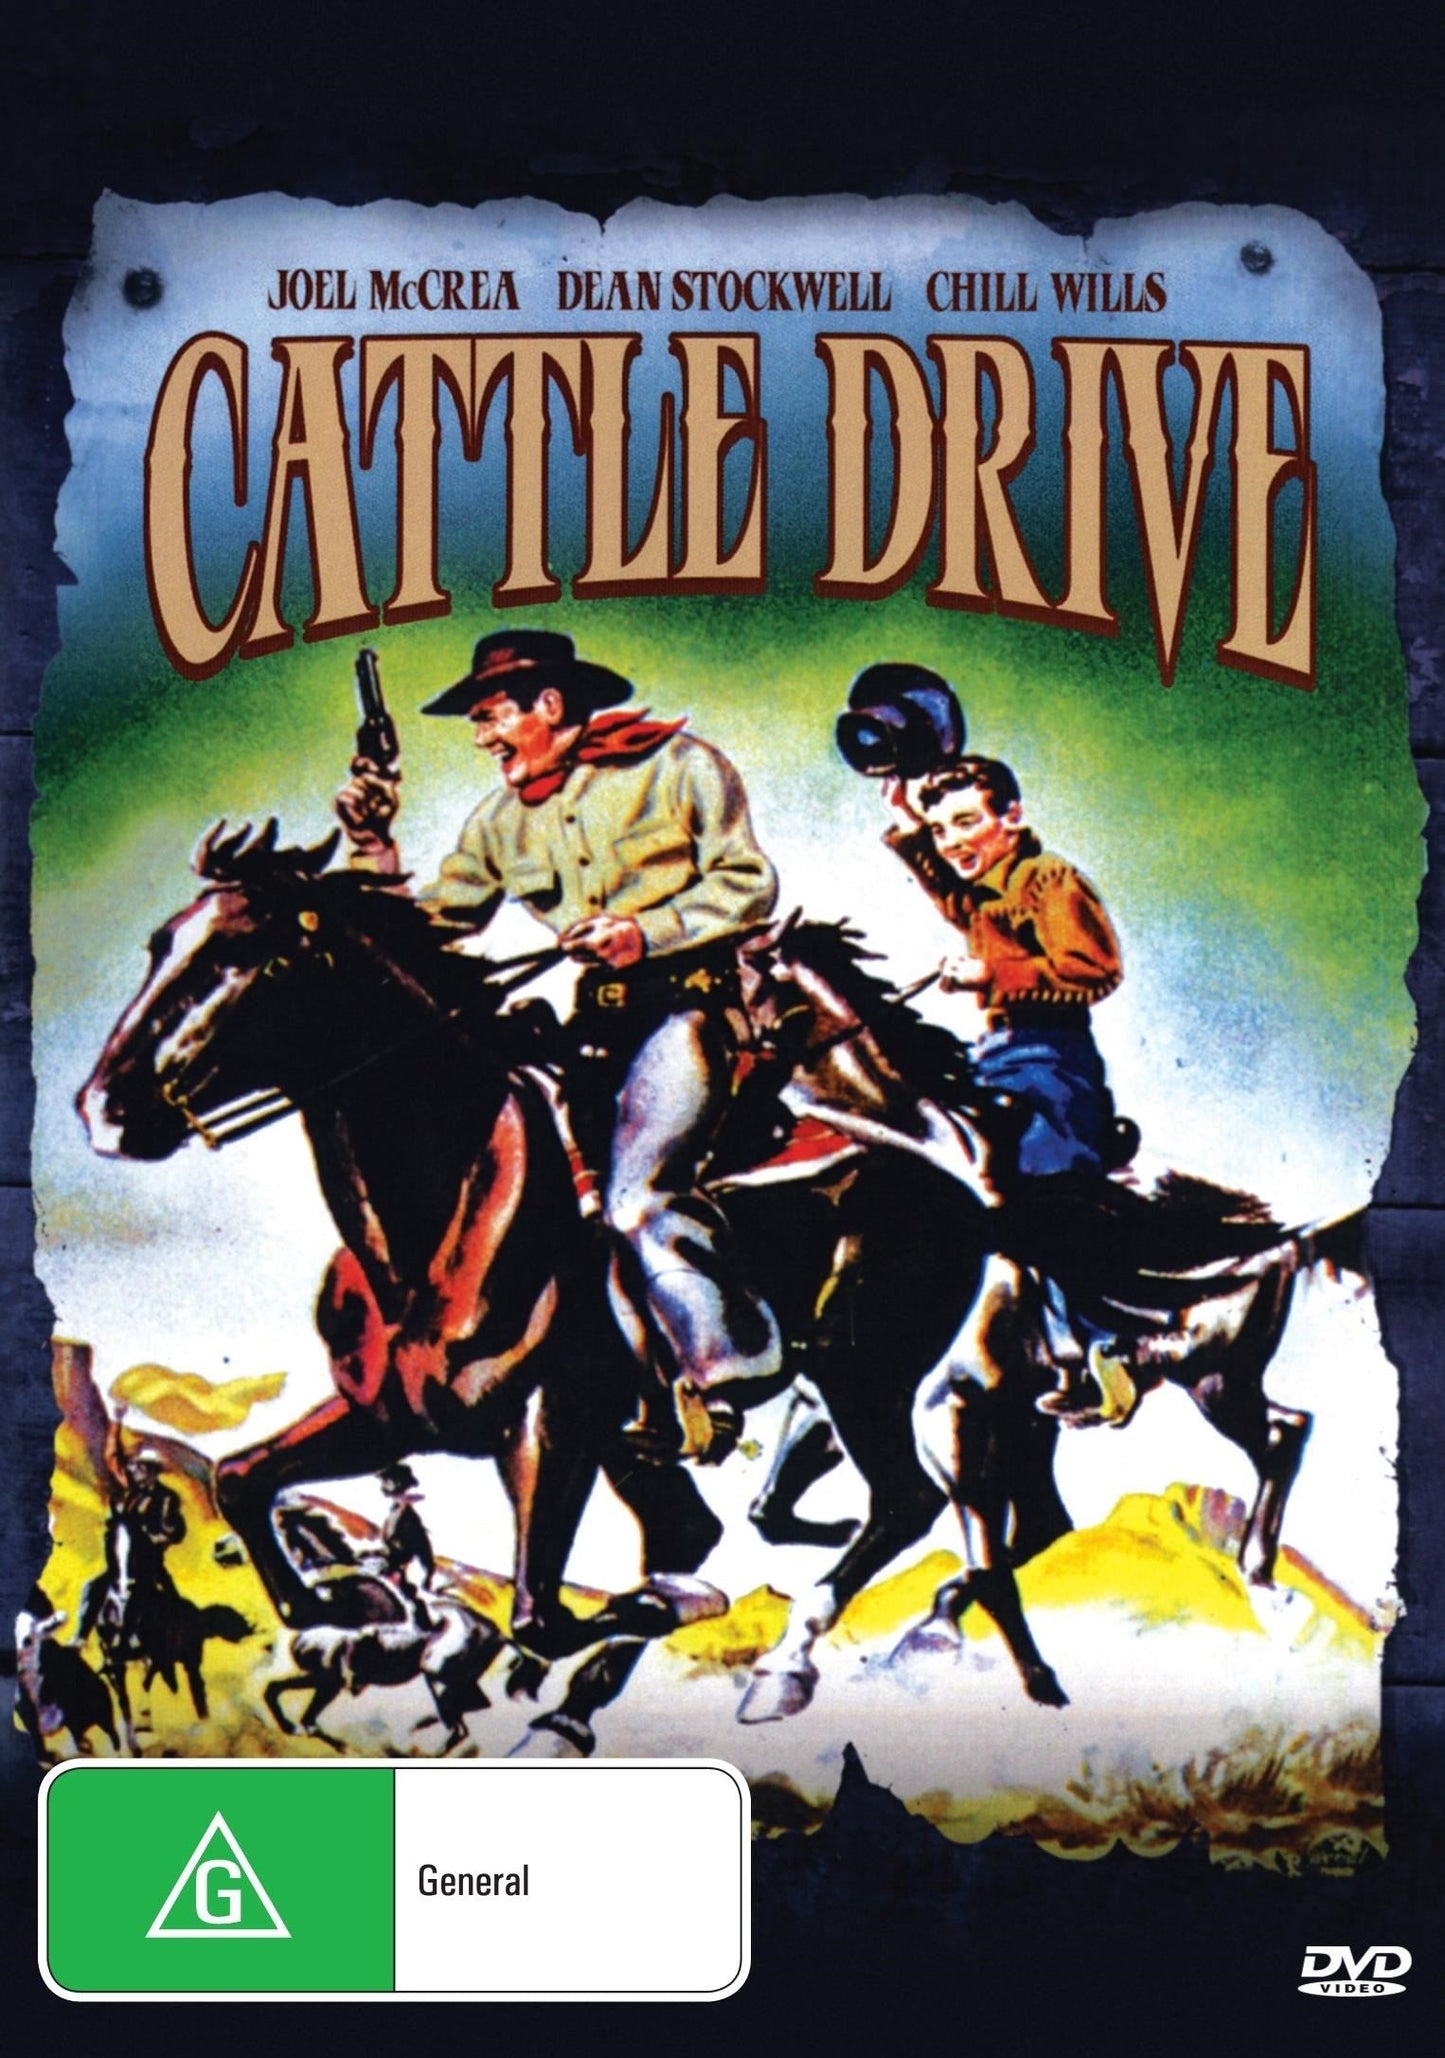 Cattle Drive rareandcollectibledvds